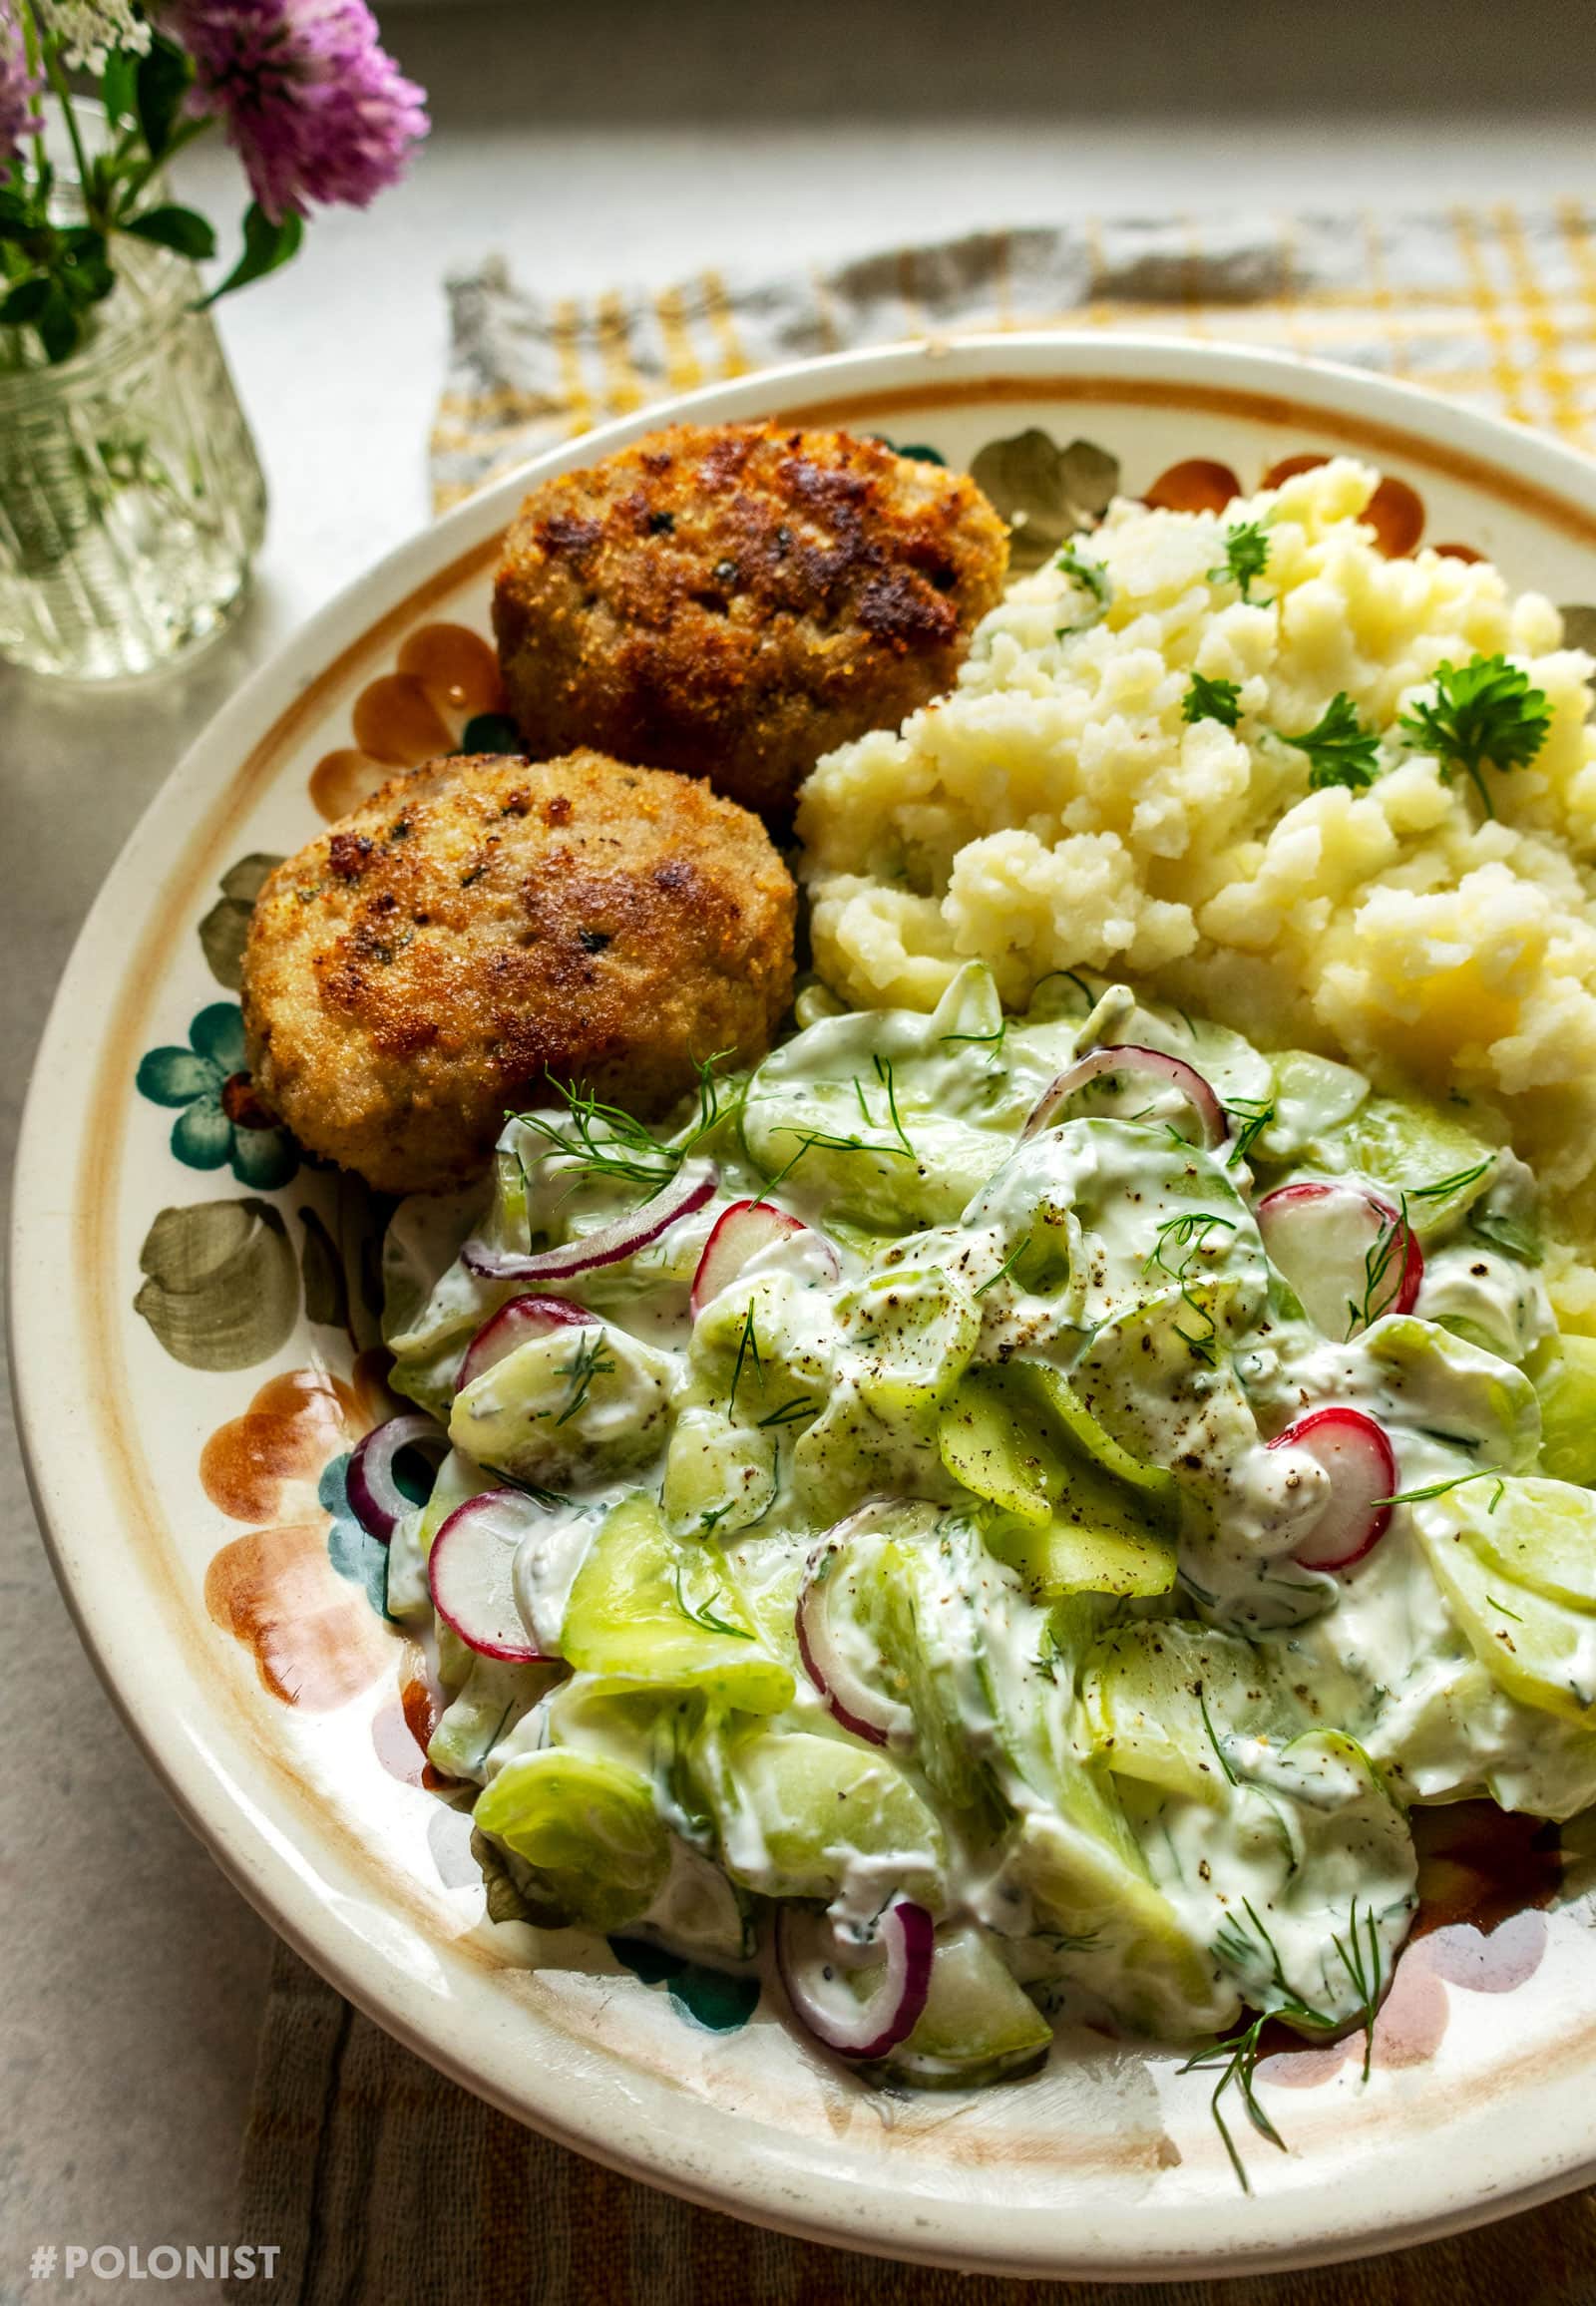 Mizeria (Polish cucumber salad) served with mashed potatoes and pork patties (kotlety mielone)